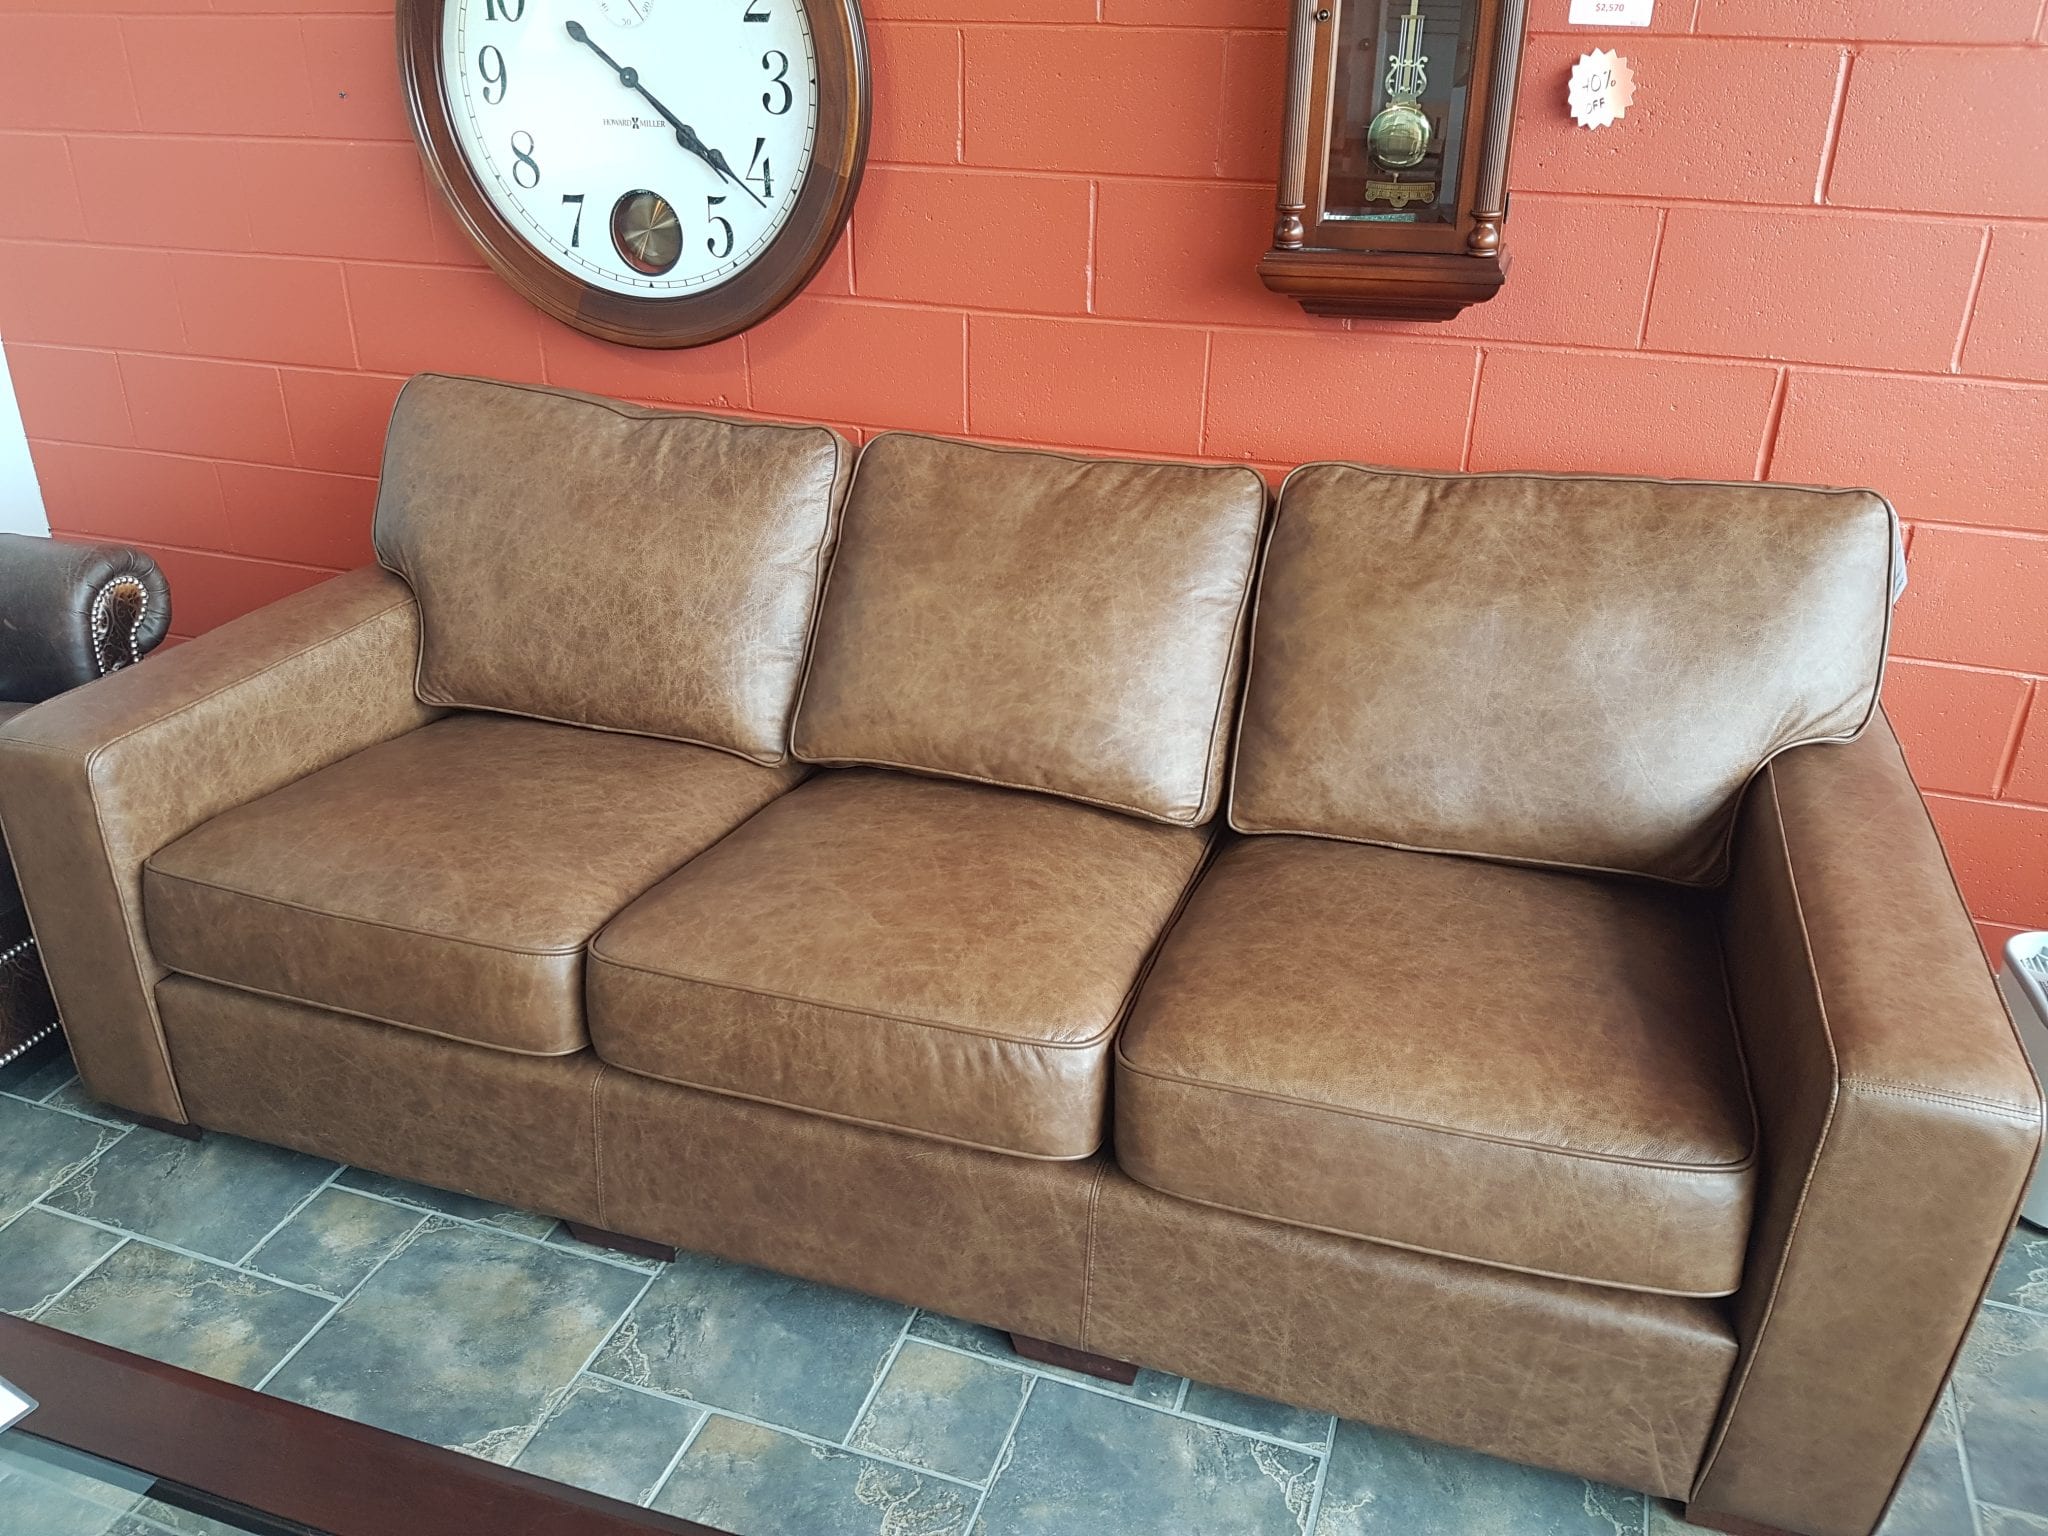 Clearance Beaumont Leather Sofa, Leather Couch Clearance